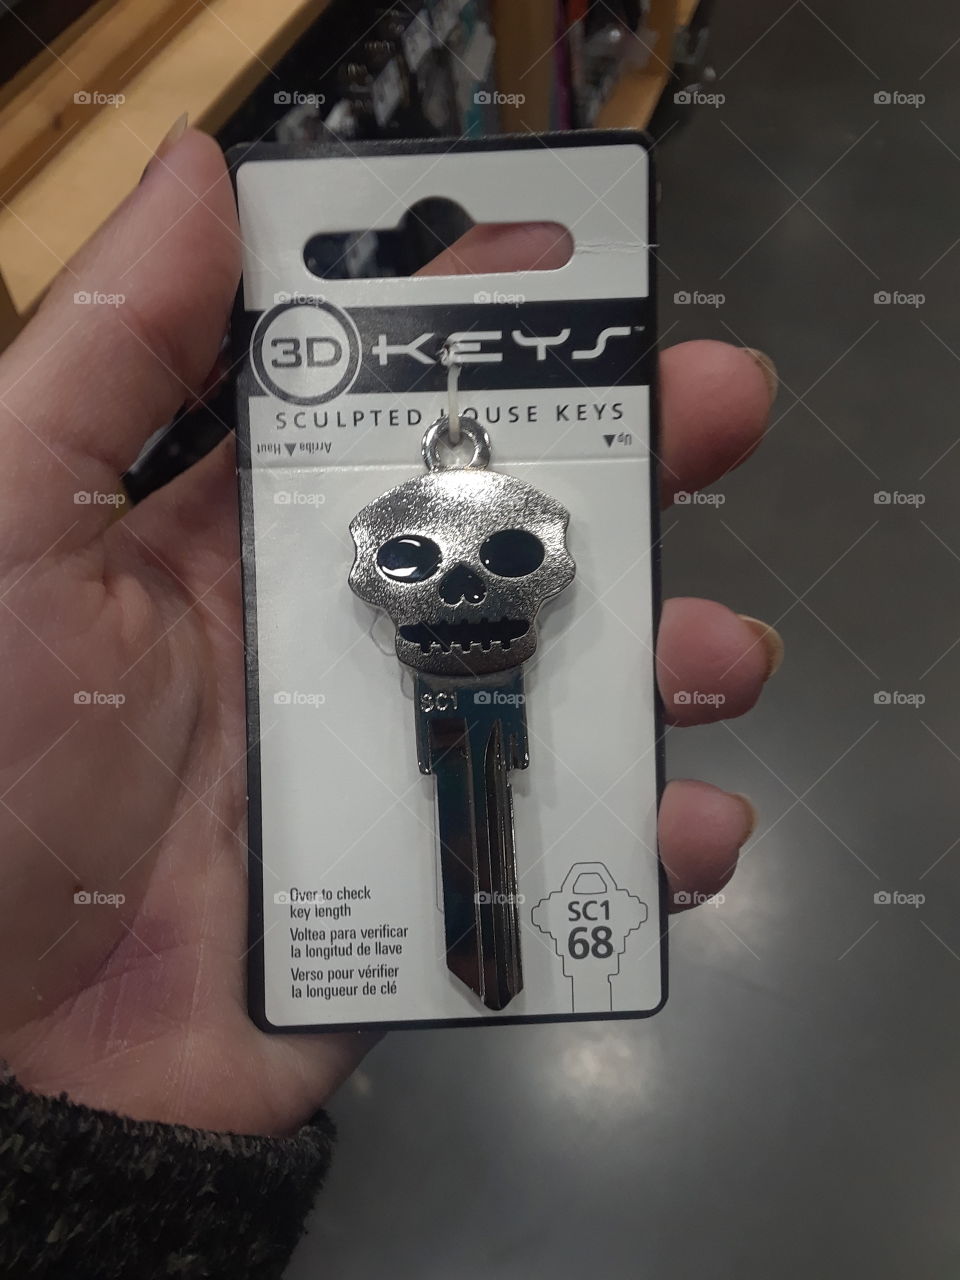 Cool Keys at Lowes